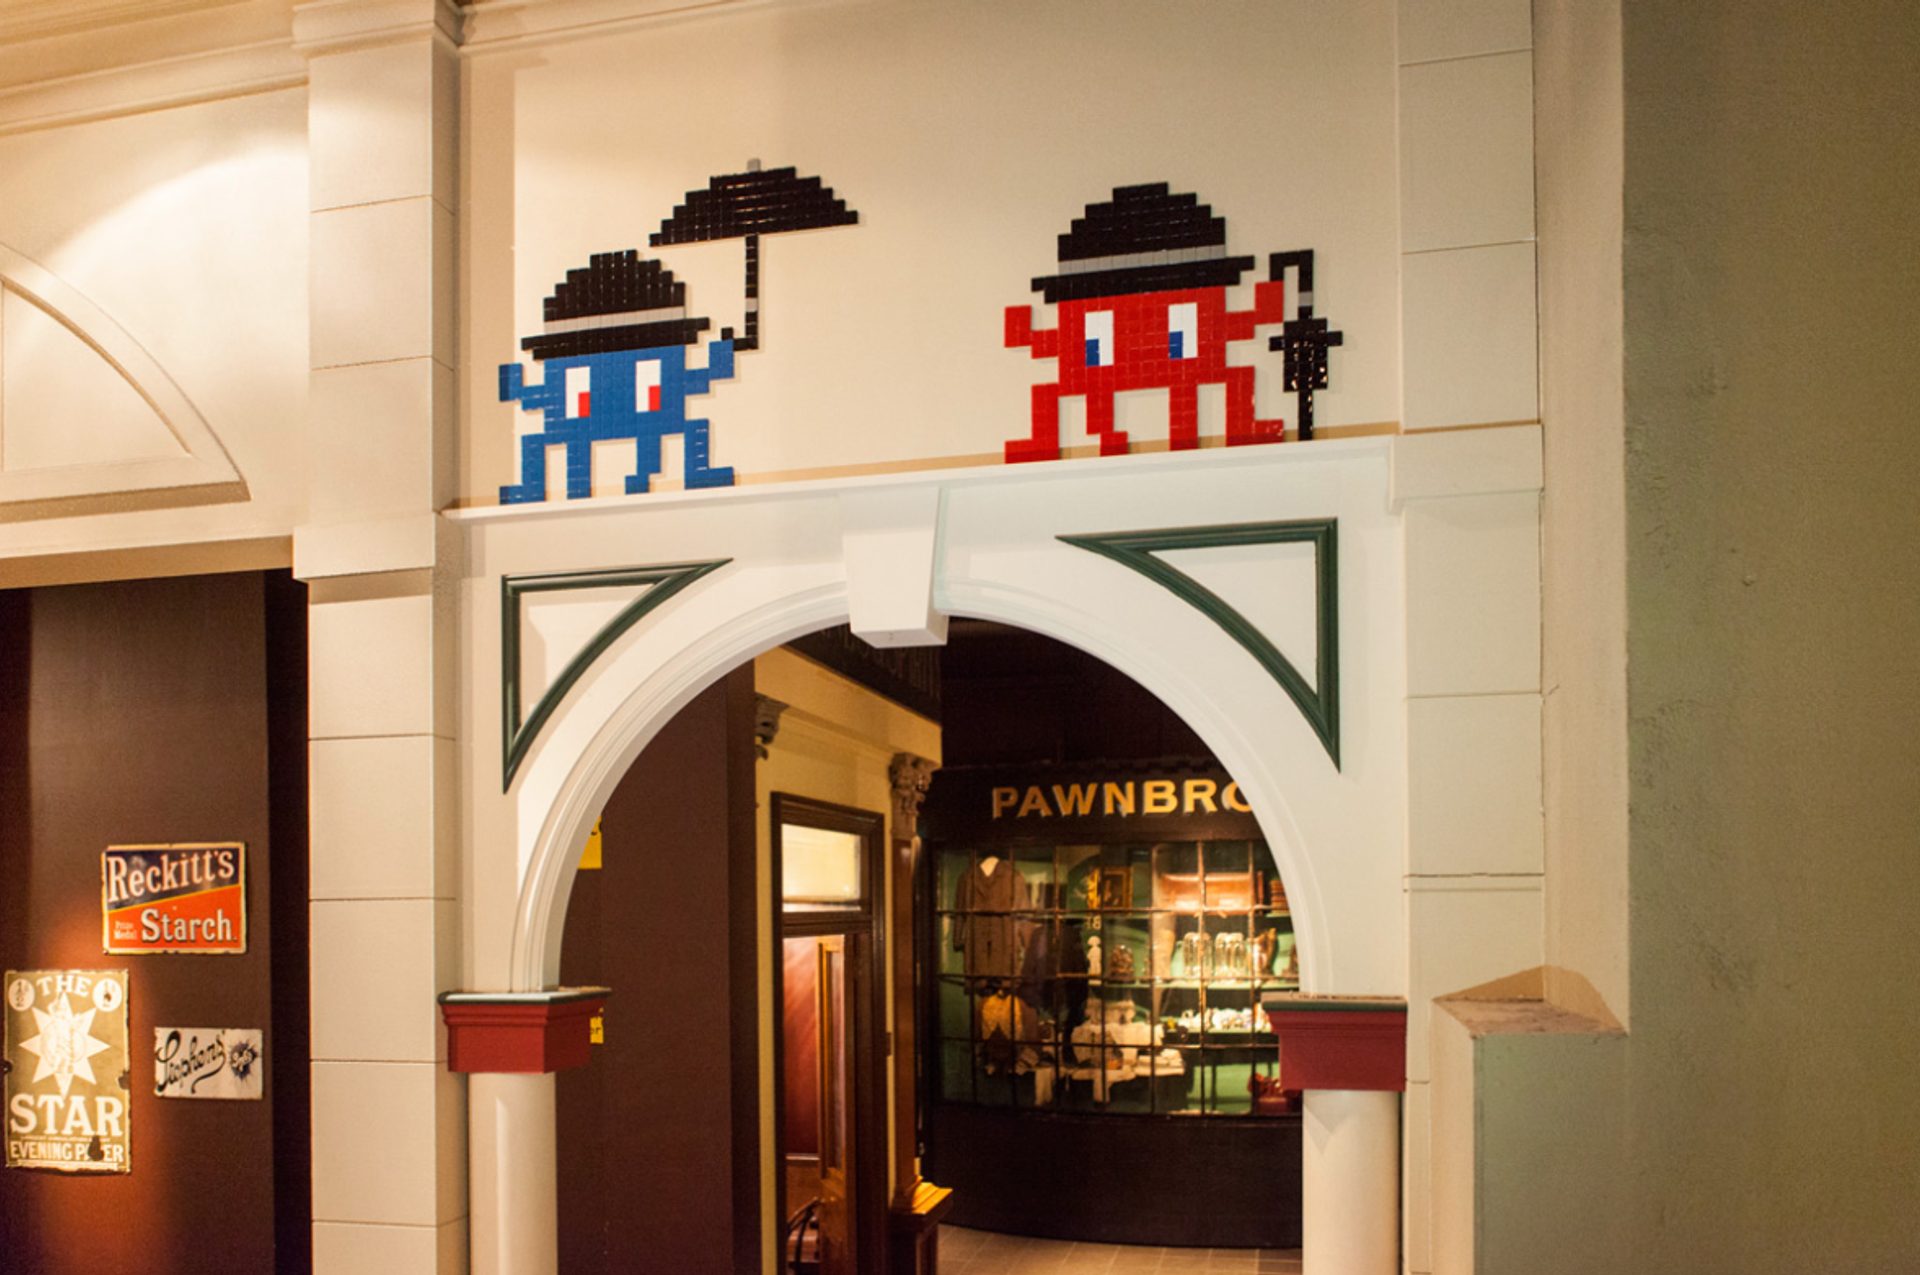 Space Pair, Museum of London by Invader